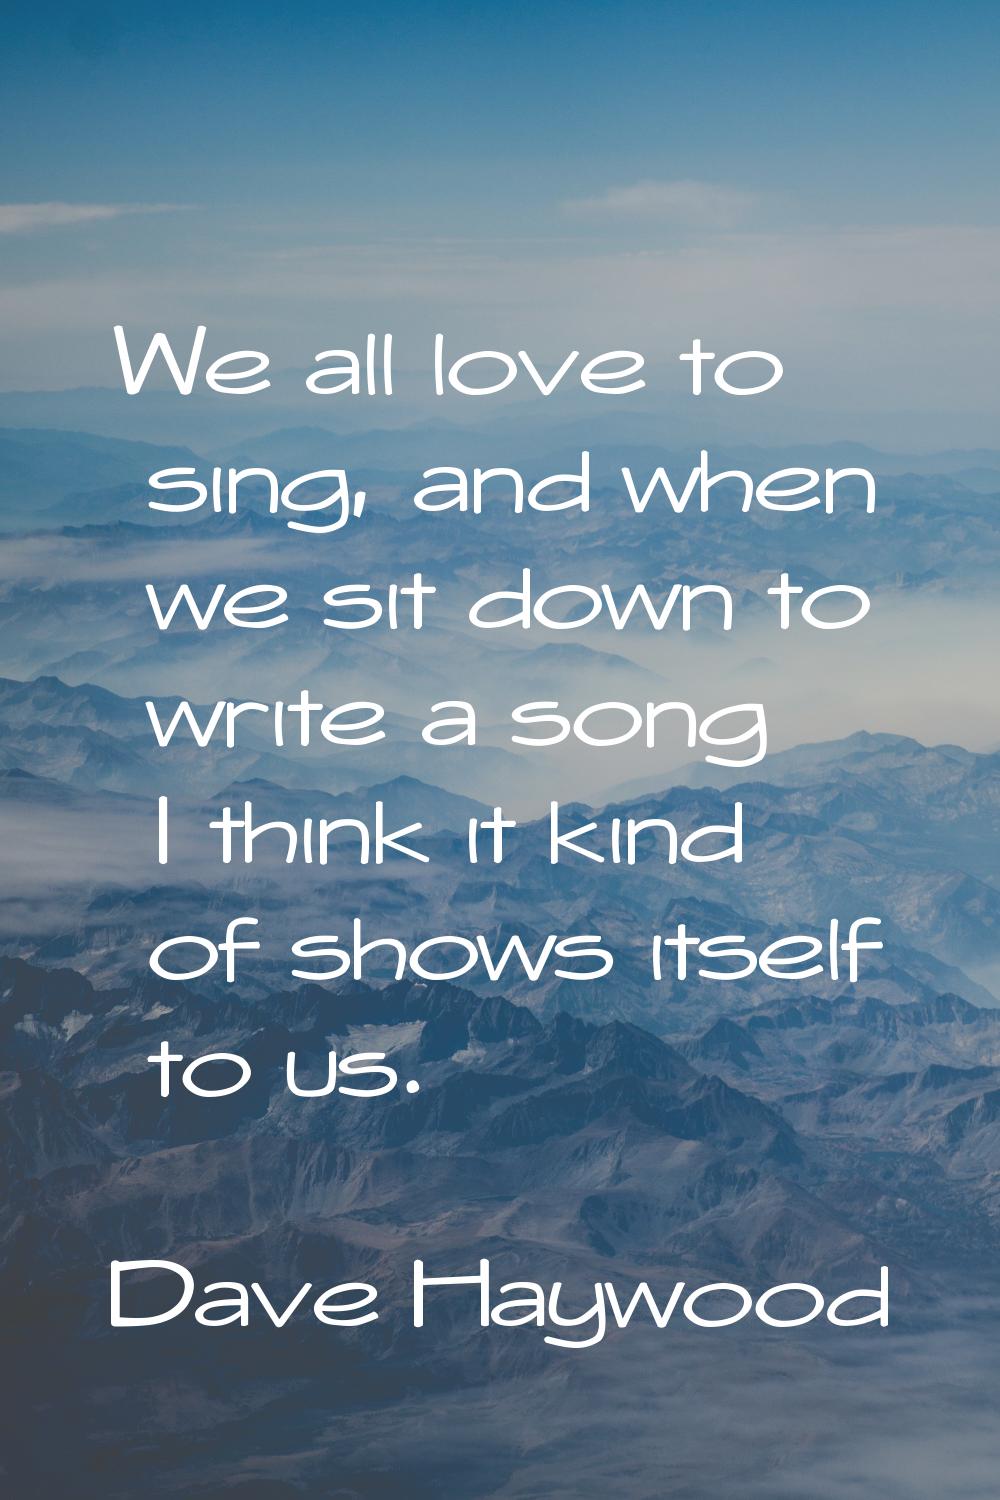 We all love to sing, and when we sit down to write a song I think it kind of shows itself to us.